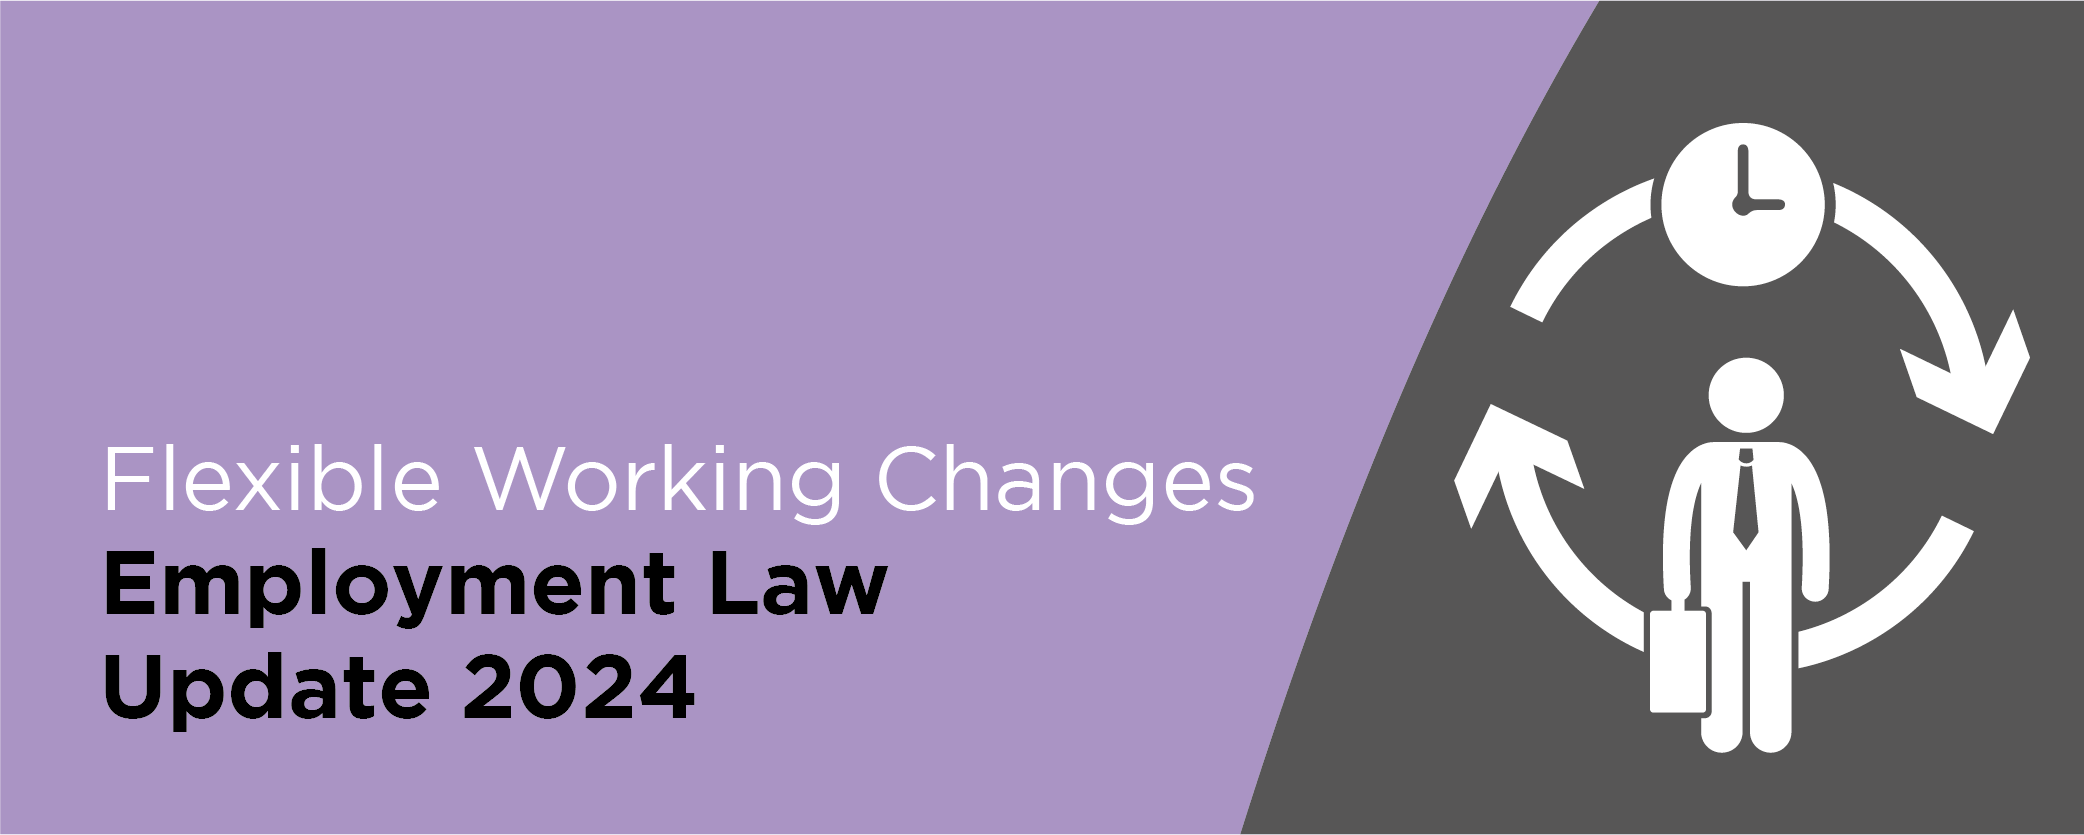 Flexible working changes: employment law update 2024 